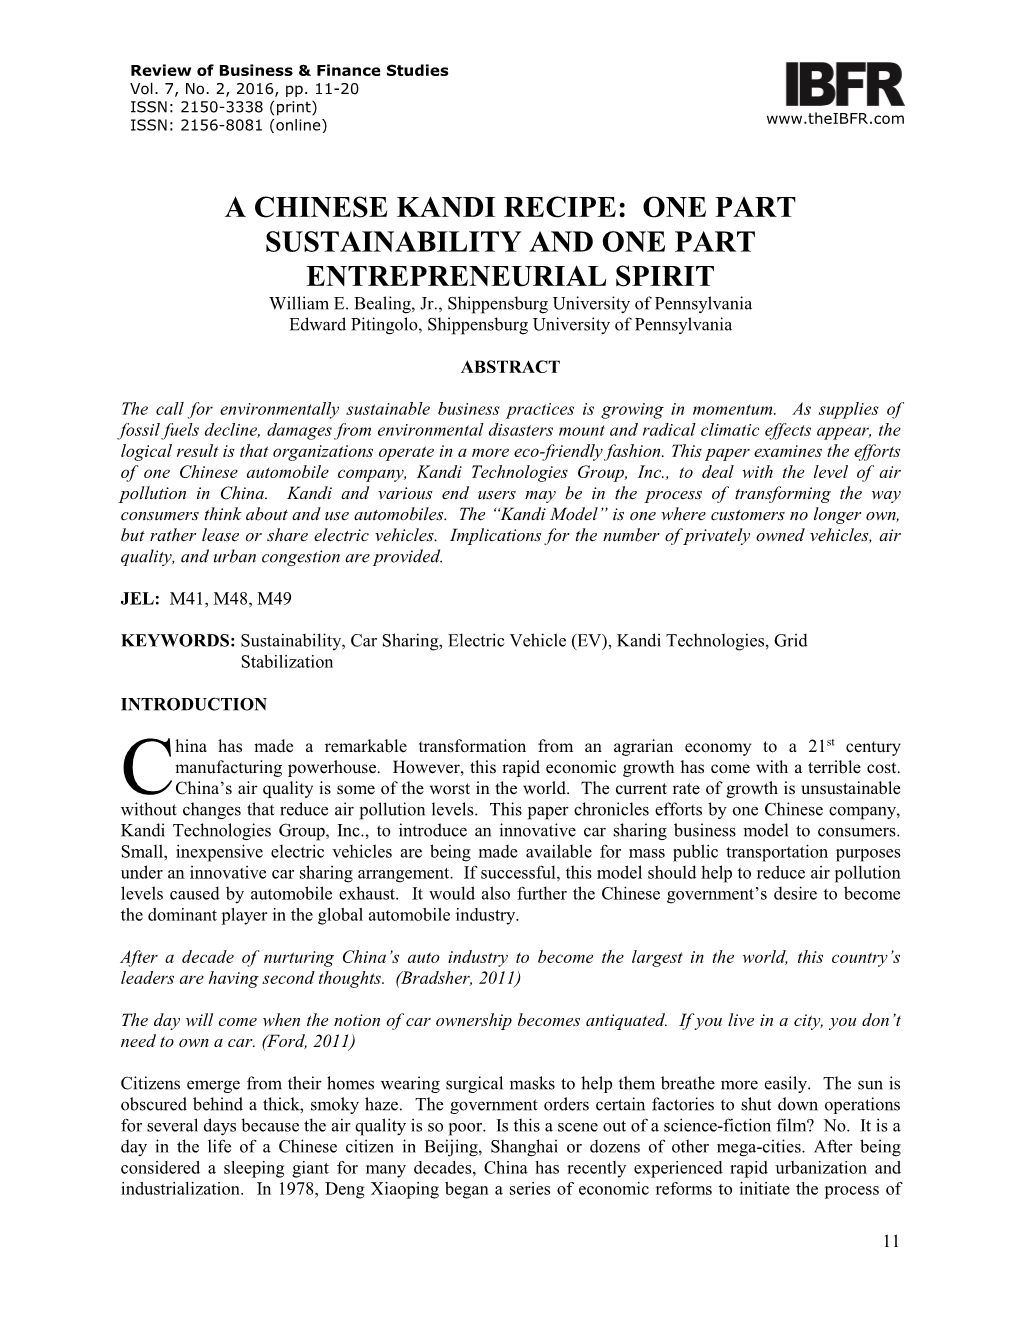 A CHINESE KANDI RECIPE: ONE PART SUSTAINABILITY and ONE PART ENTREPRENEURIAL SPIRIT William E